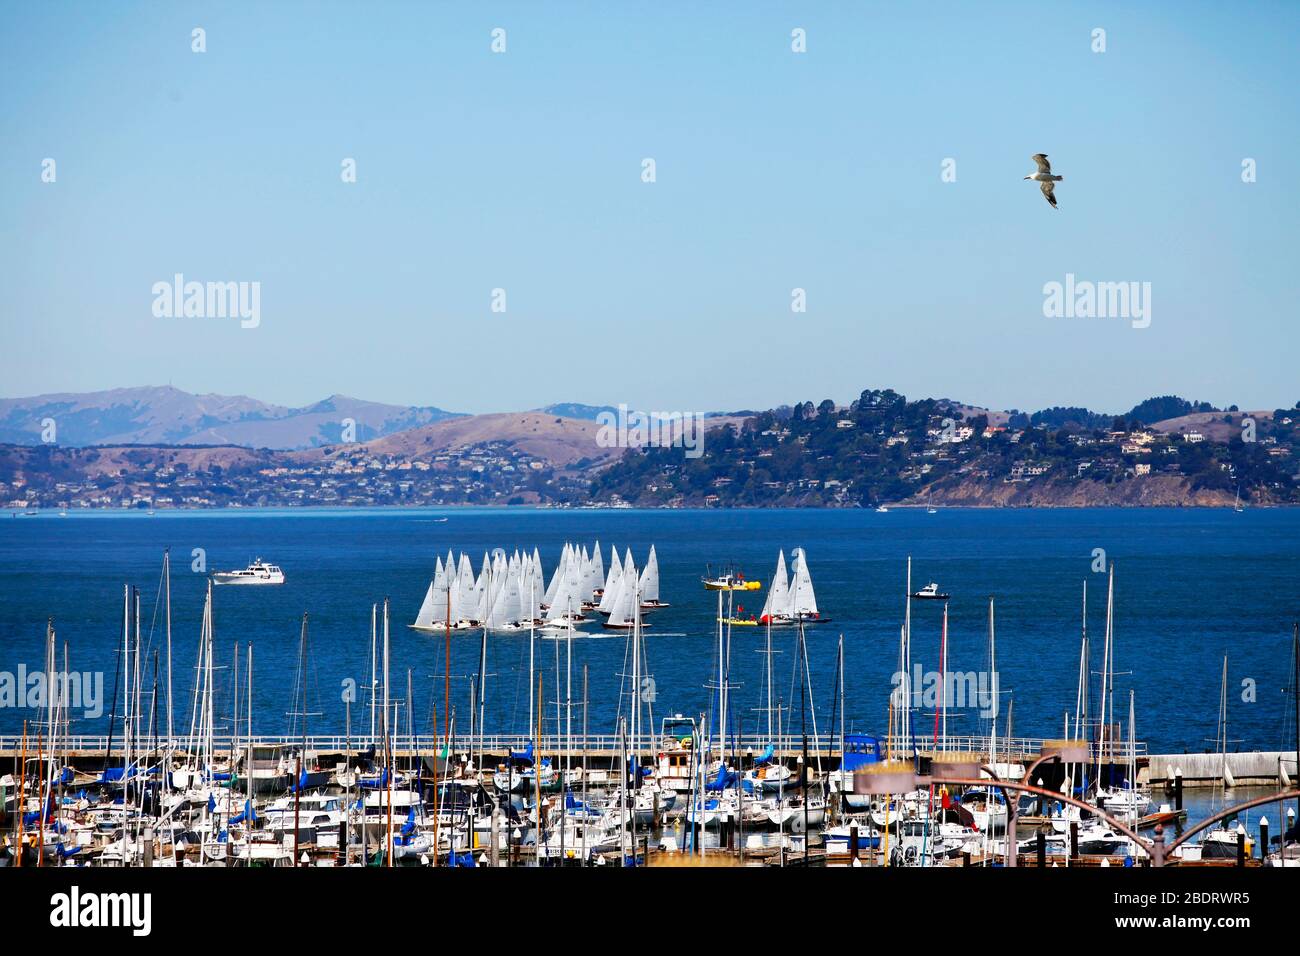 Group of sailboats in San Francisco Bay against the backdrop of the city of Sausolito Stock Photo